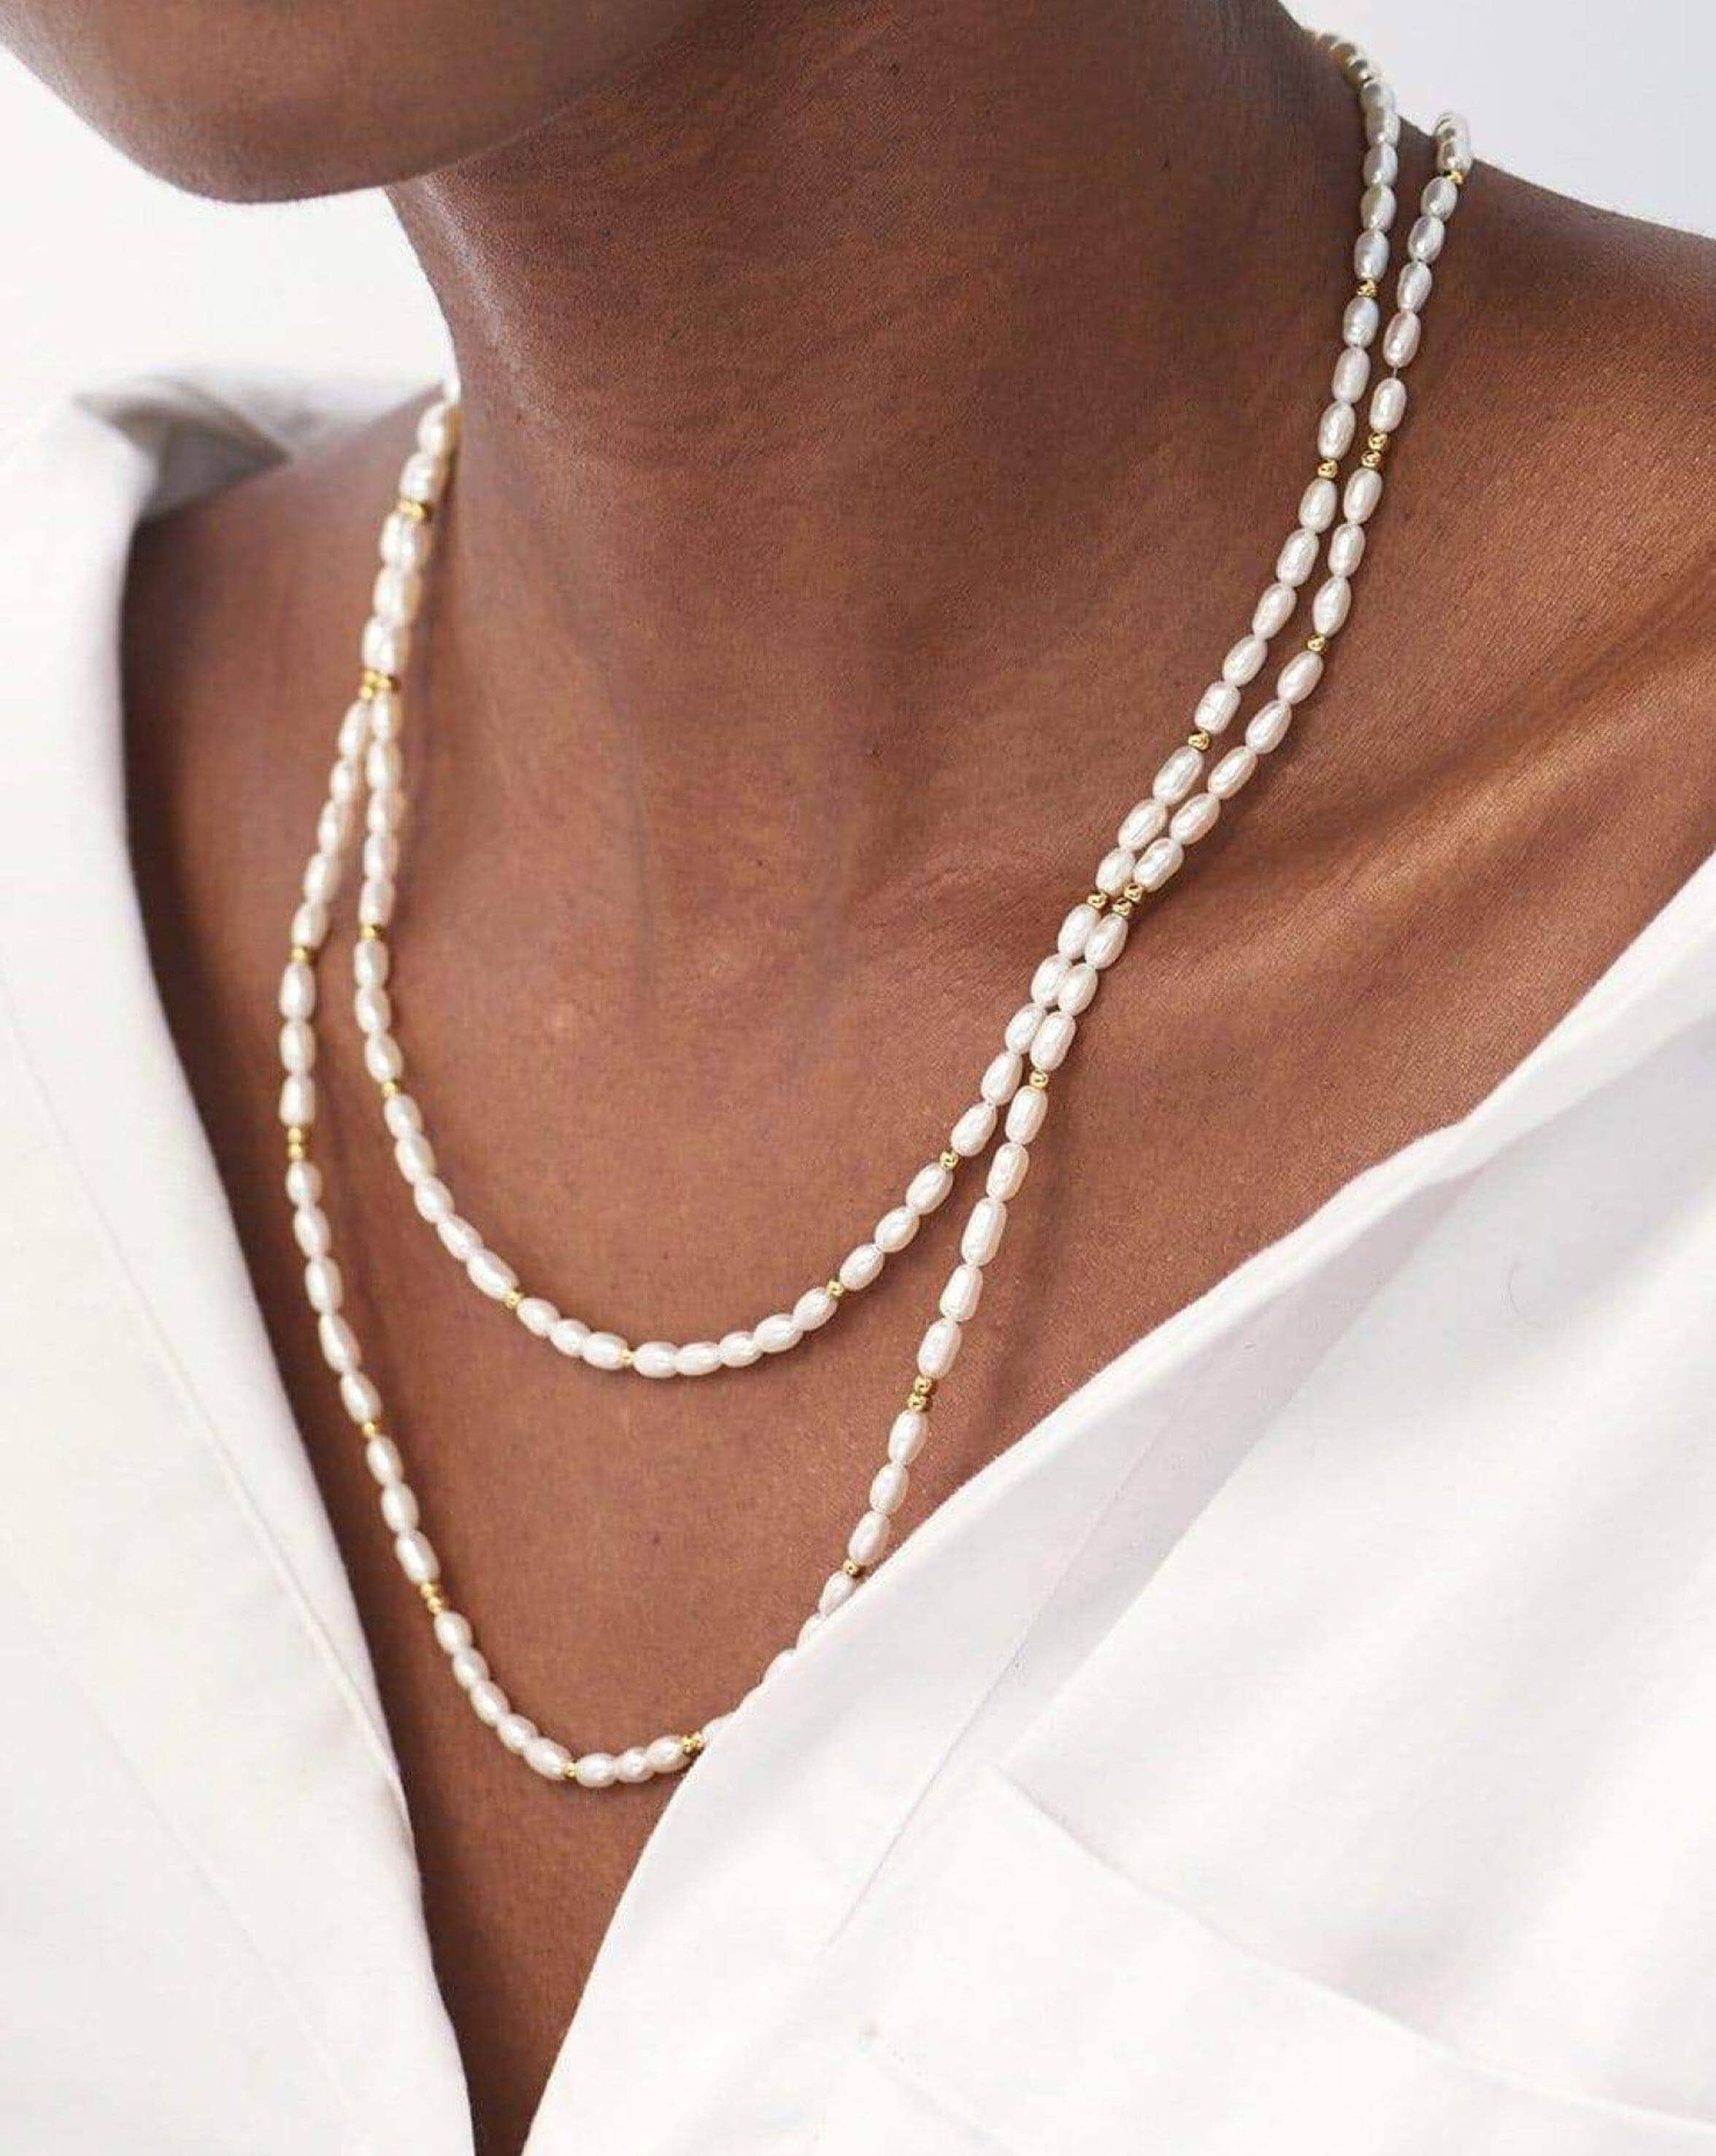 Six strand natural white freshwater and seed pearl necklace